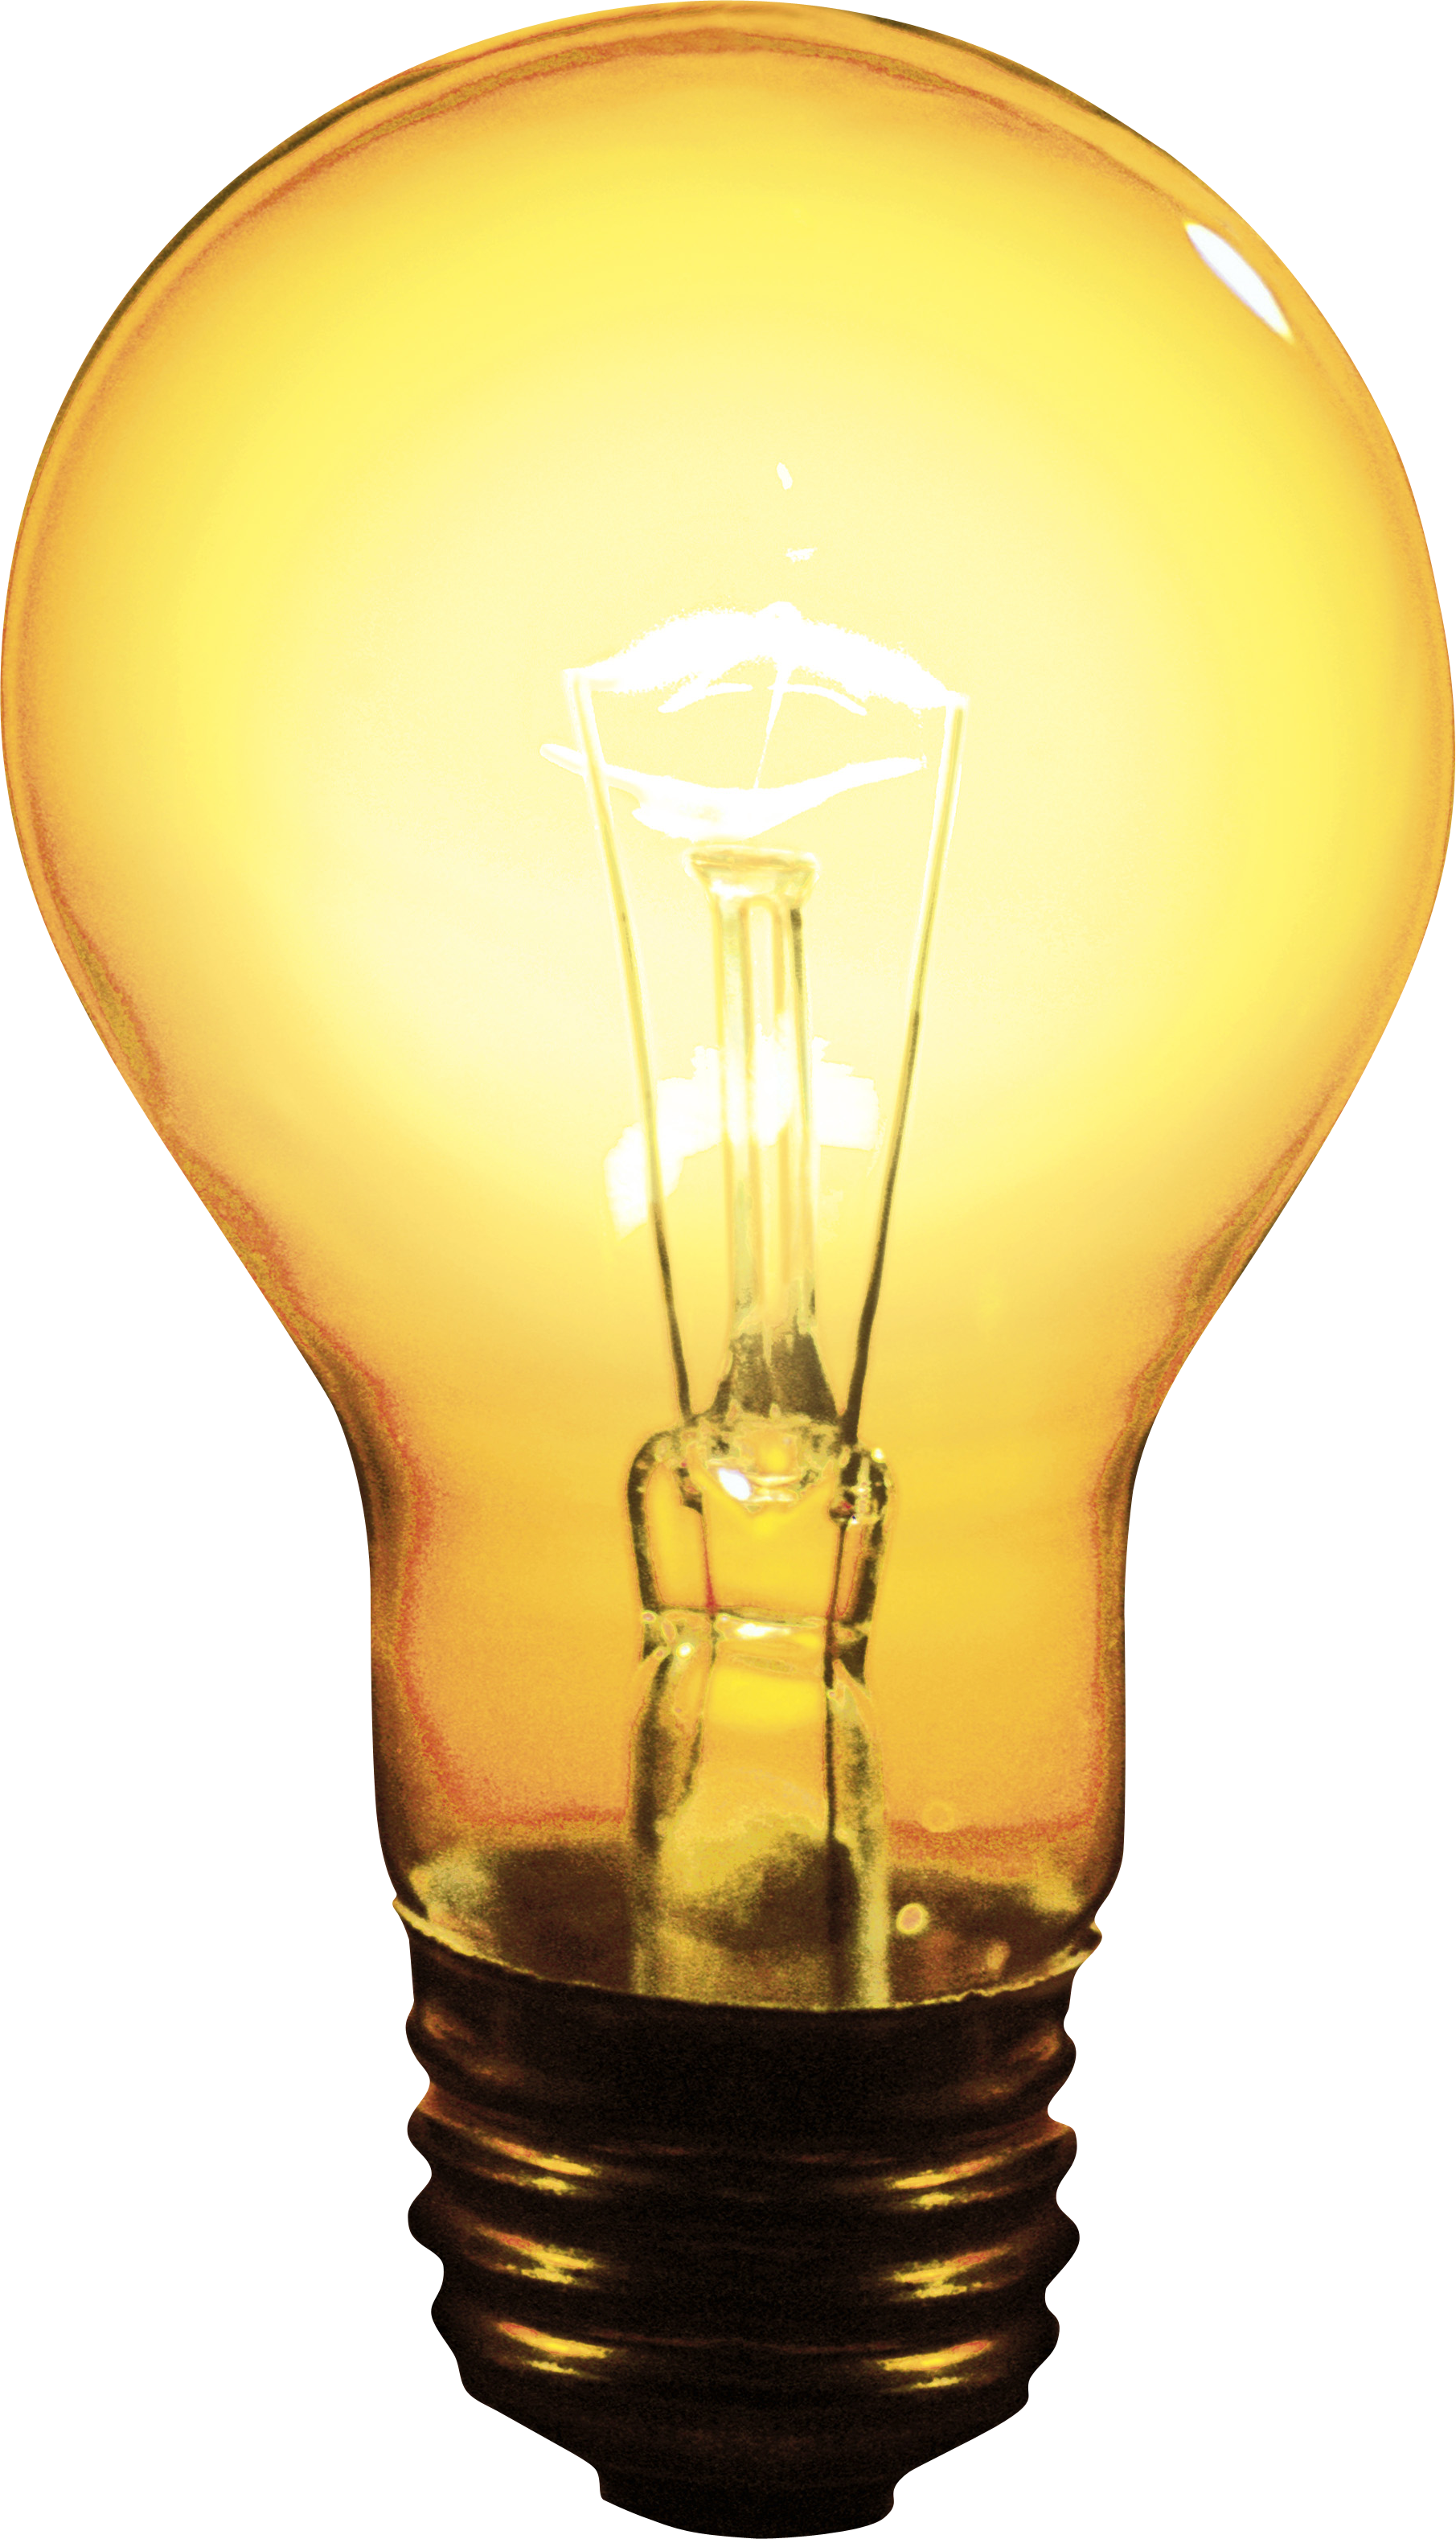 Electric Lamp Png Image - Lamp, Transparent background PNG HD thumbnail